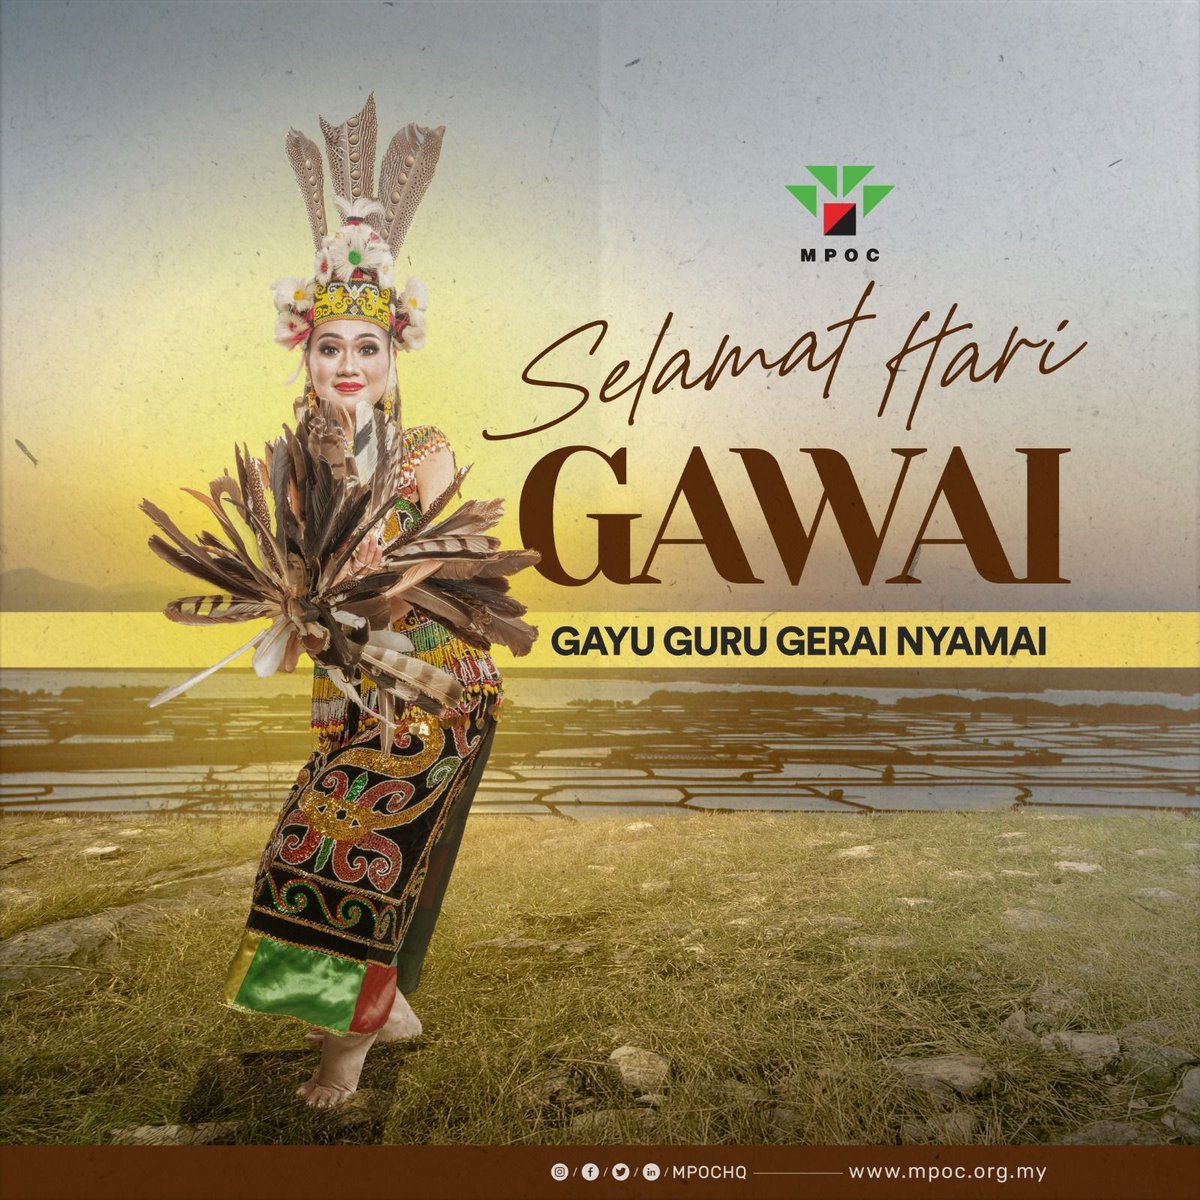 Gayu Guru Gerai Nyamai We at #MPOC would like to wish a Happy #Gawai to all who celebrate this joyous occasion, especially in the state of #Sarawak. May the festivities bring delight to you, your family, and friends.